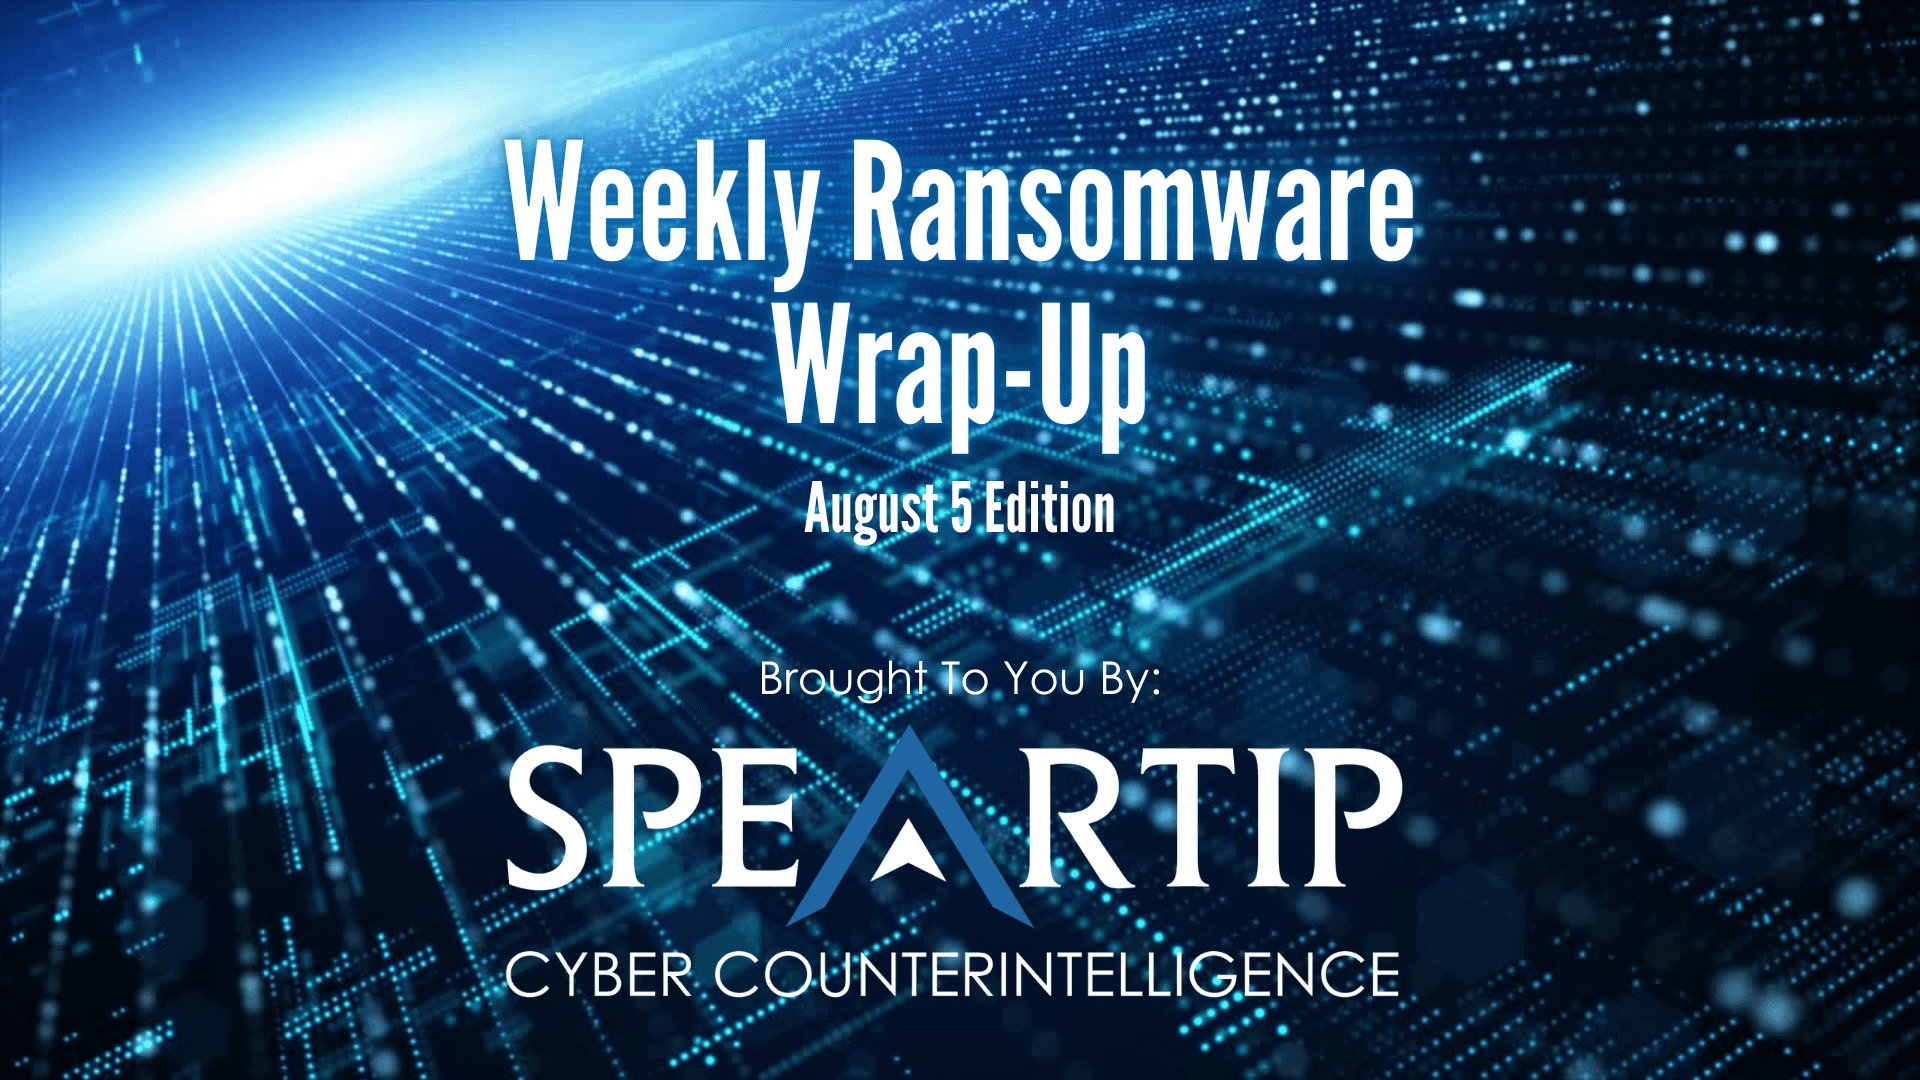 August 5, 2022 Ransomware Wrap-Up